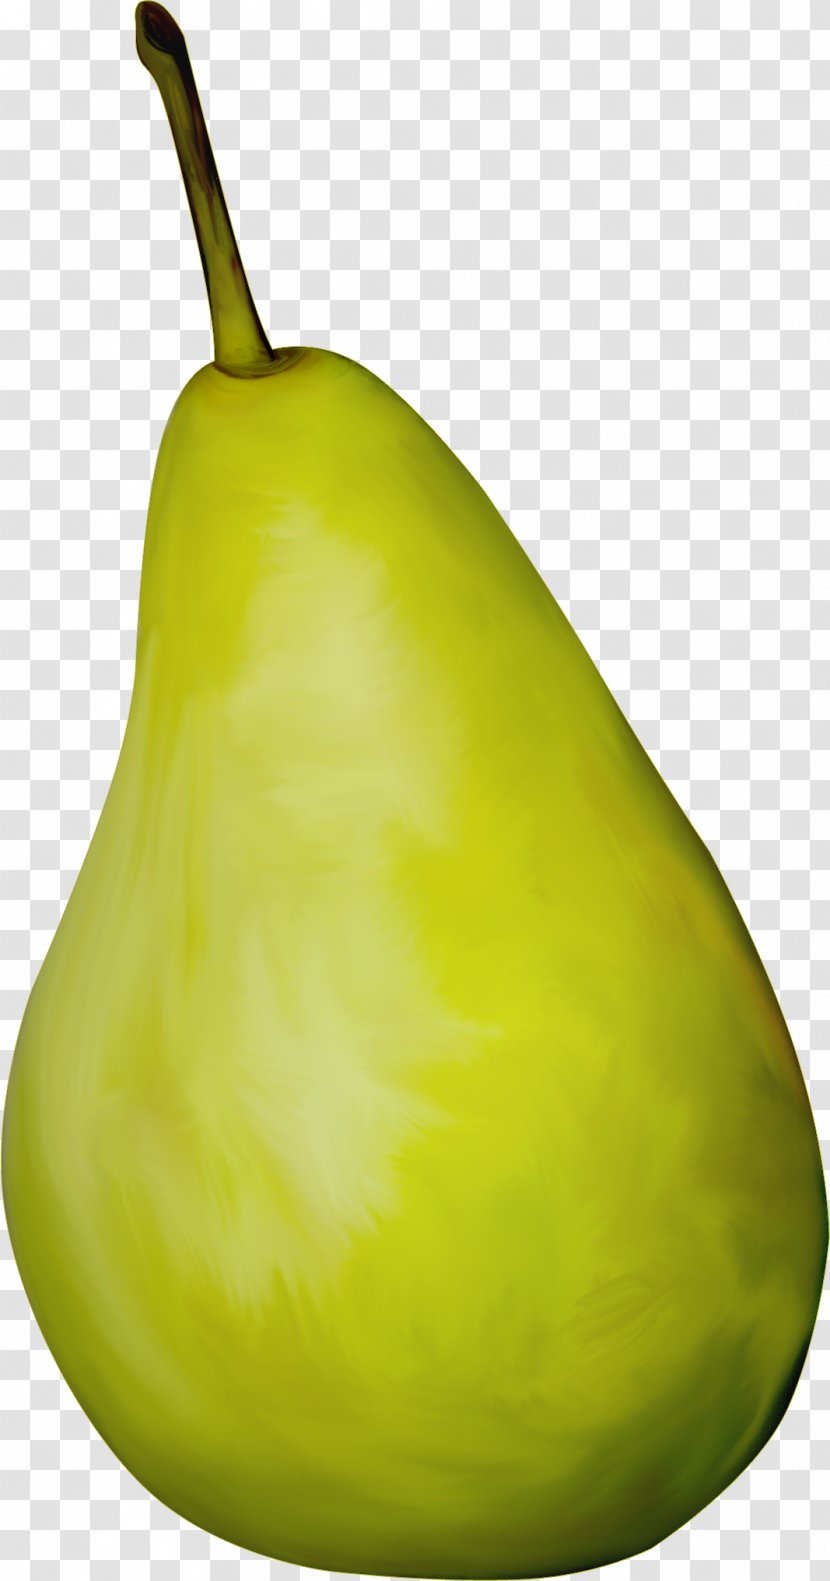 Pear Green Icon - Pears Transparent PNG